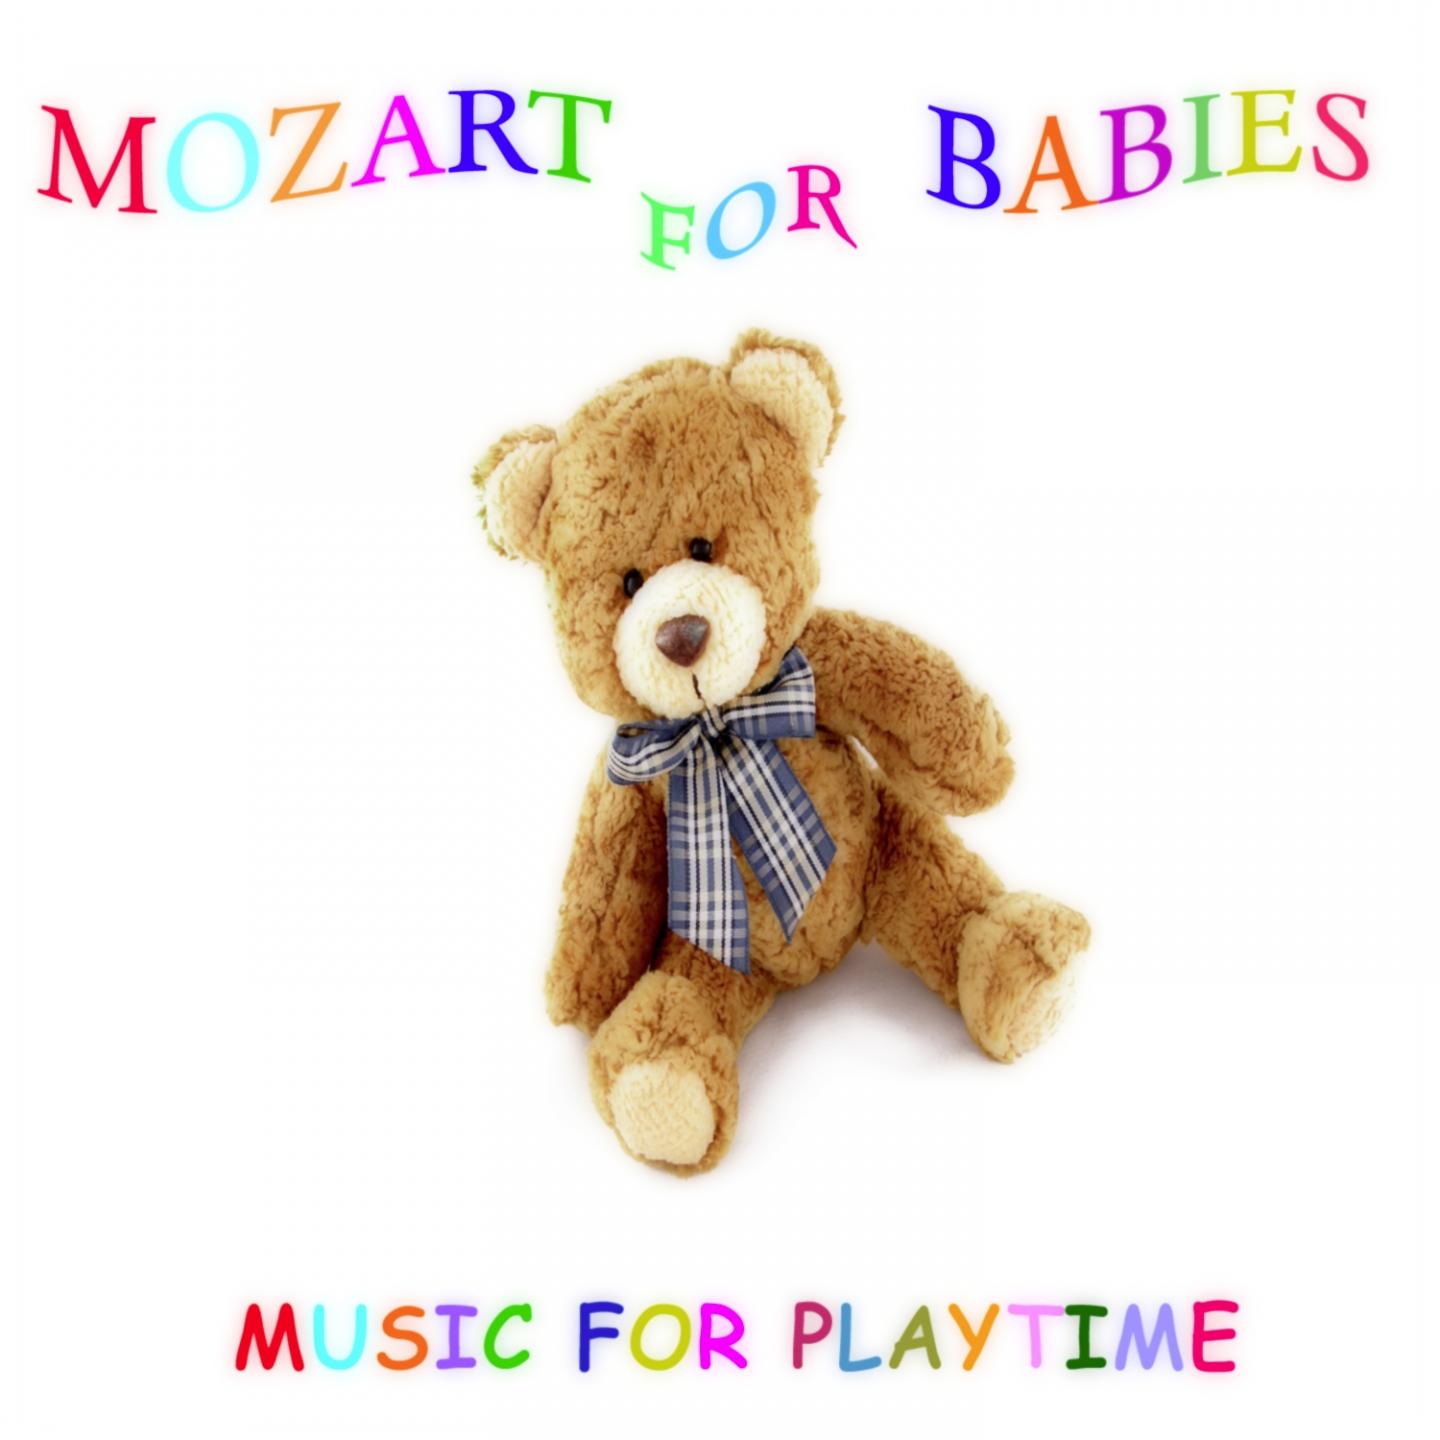 Mozart for Babies: Music for Playtime